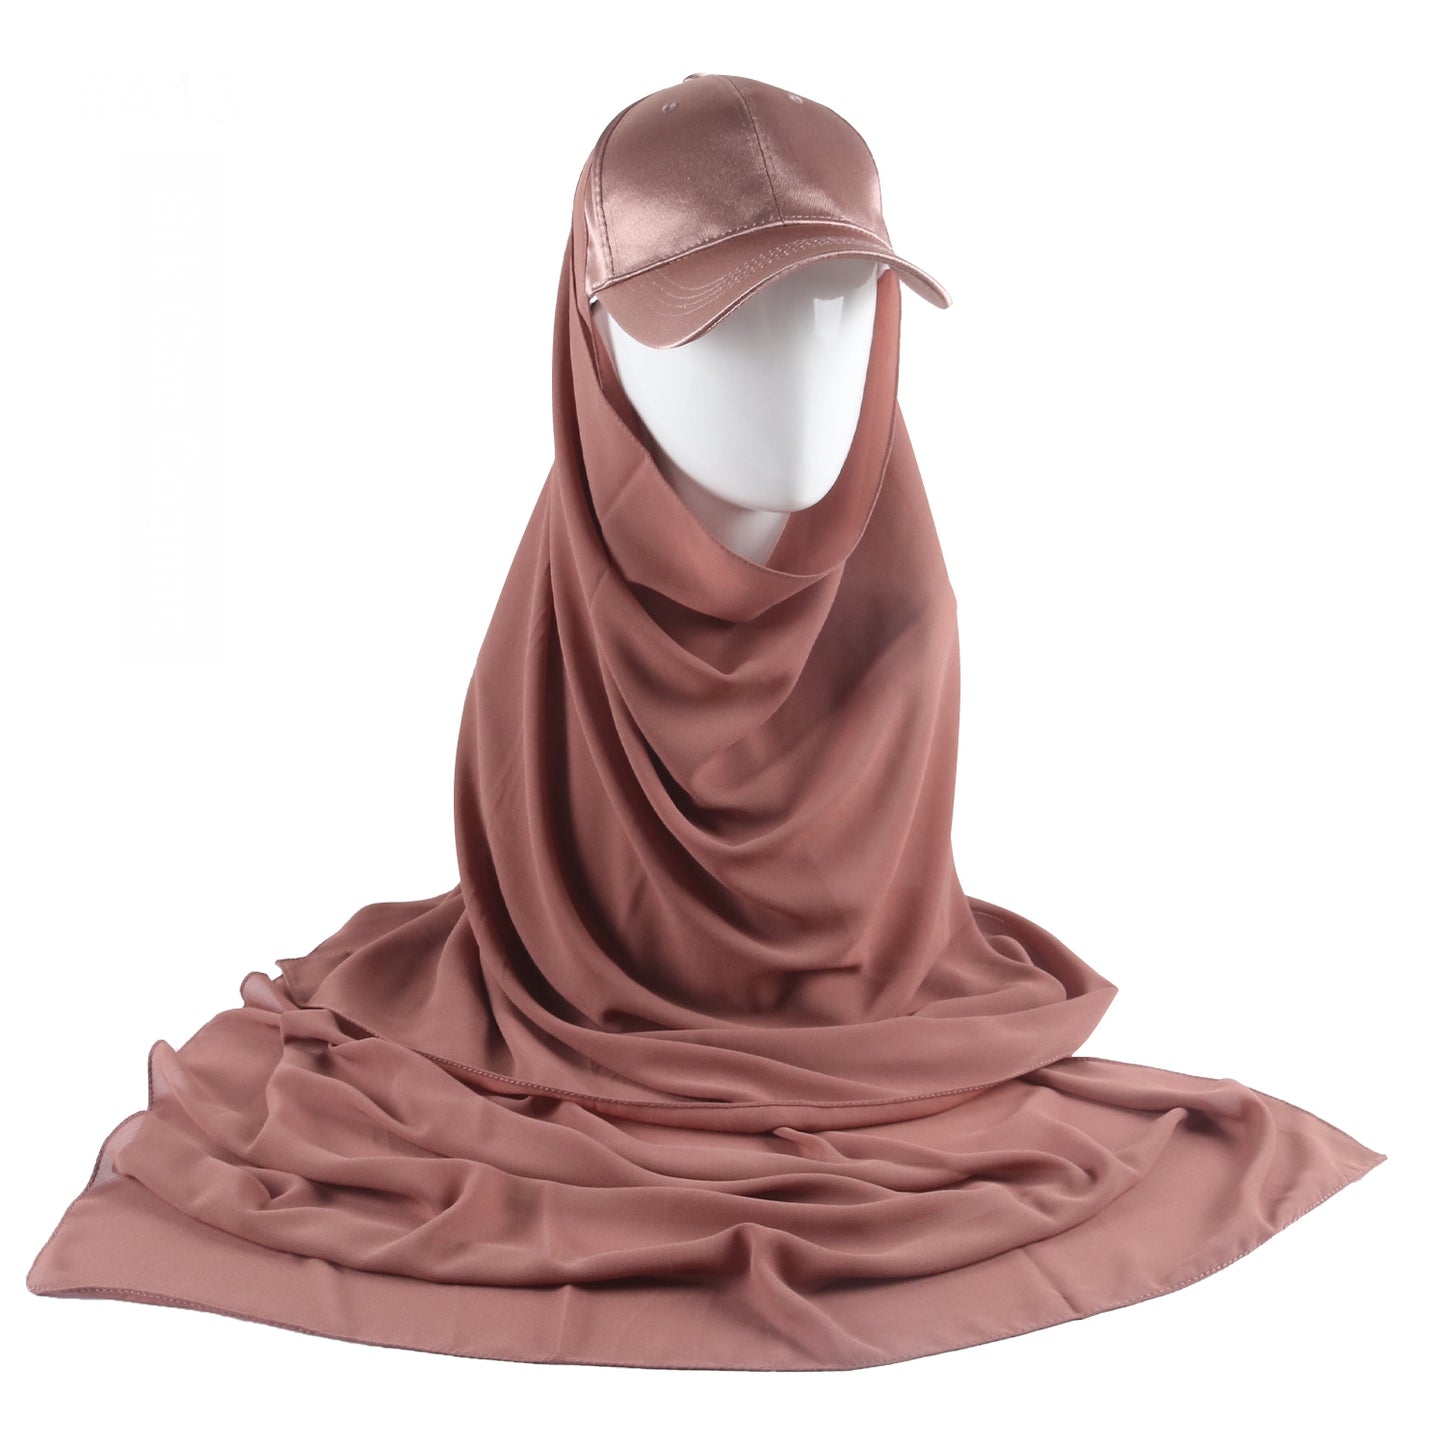 Immerse yourself in the warm and rich sophistication of the Mocha Satin Baseball Cap with Chiffon Hijab, a luxurious creation from Hikmah Boutique. This exquisite accessory seamlessly blends the casual allure of a classic baseball cap with the opulent feel of satin and the graceful flow of chiffon hijab. 